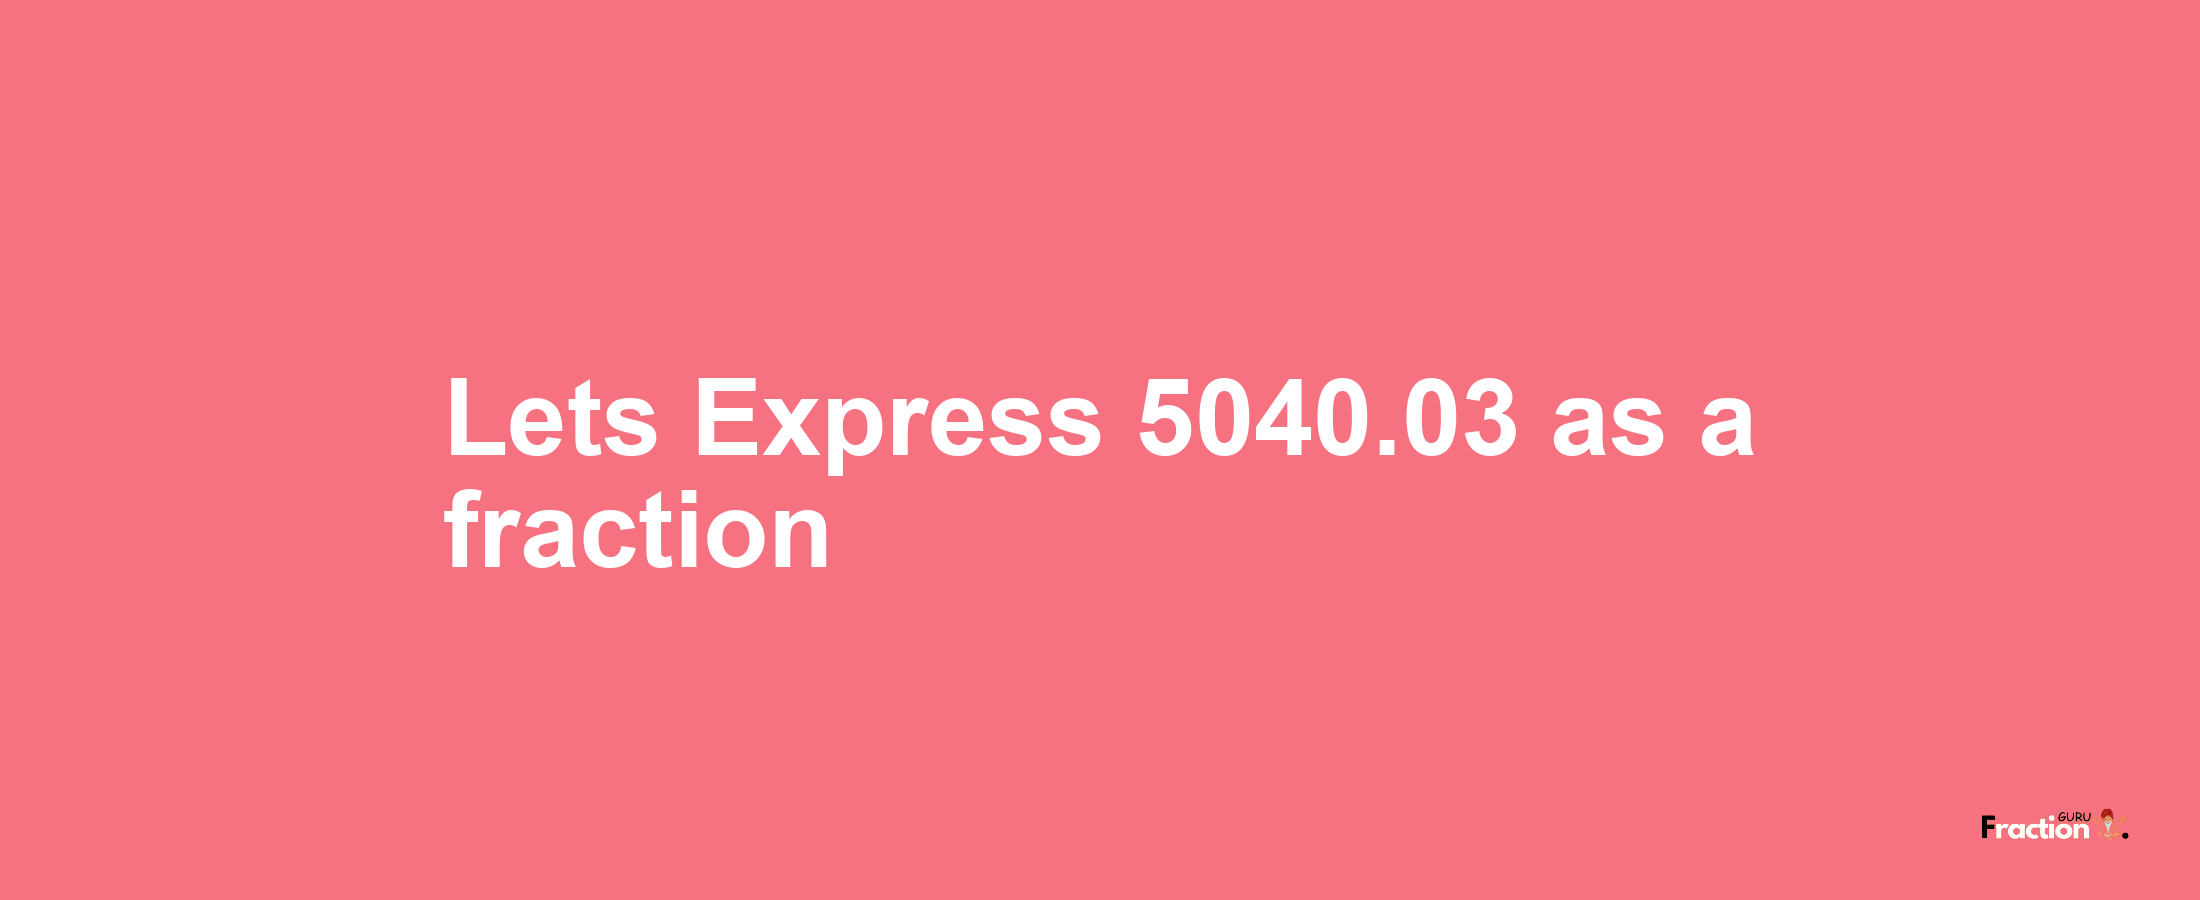 Lets Express 5040.03 as afraction